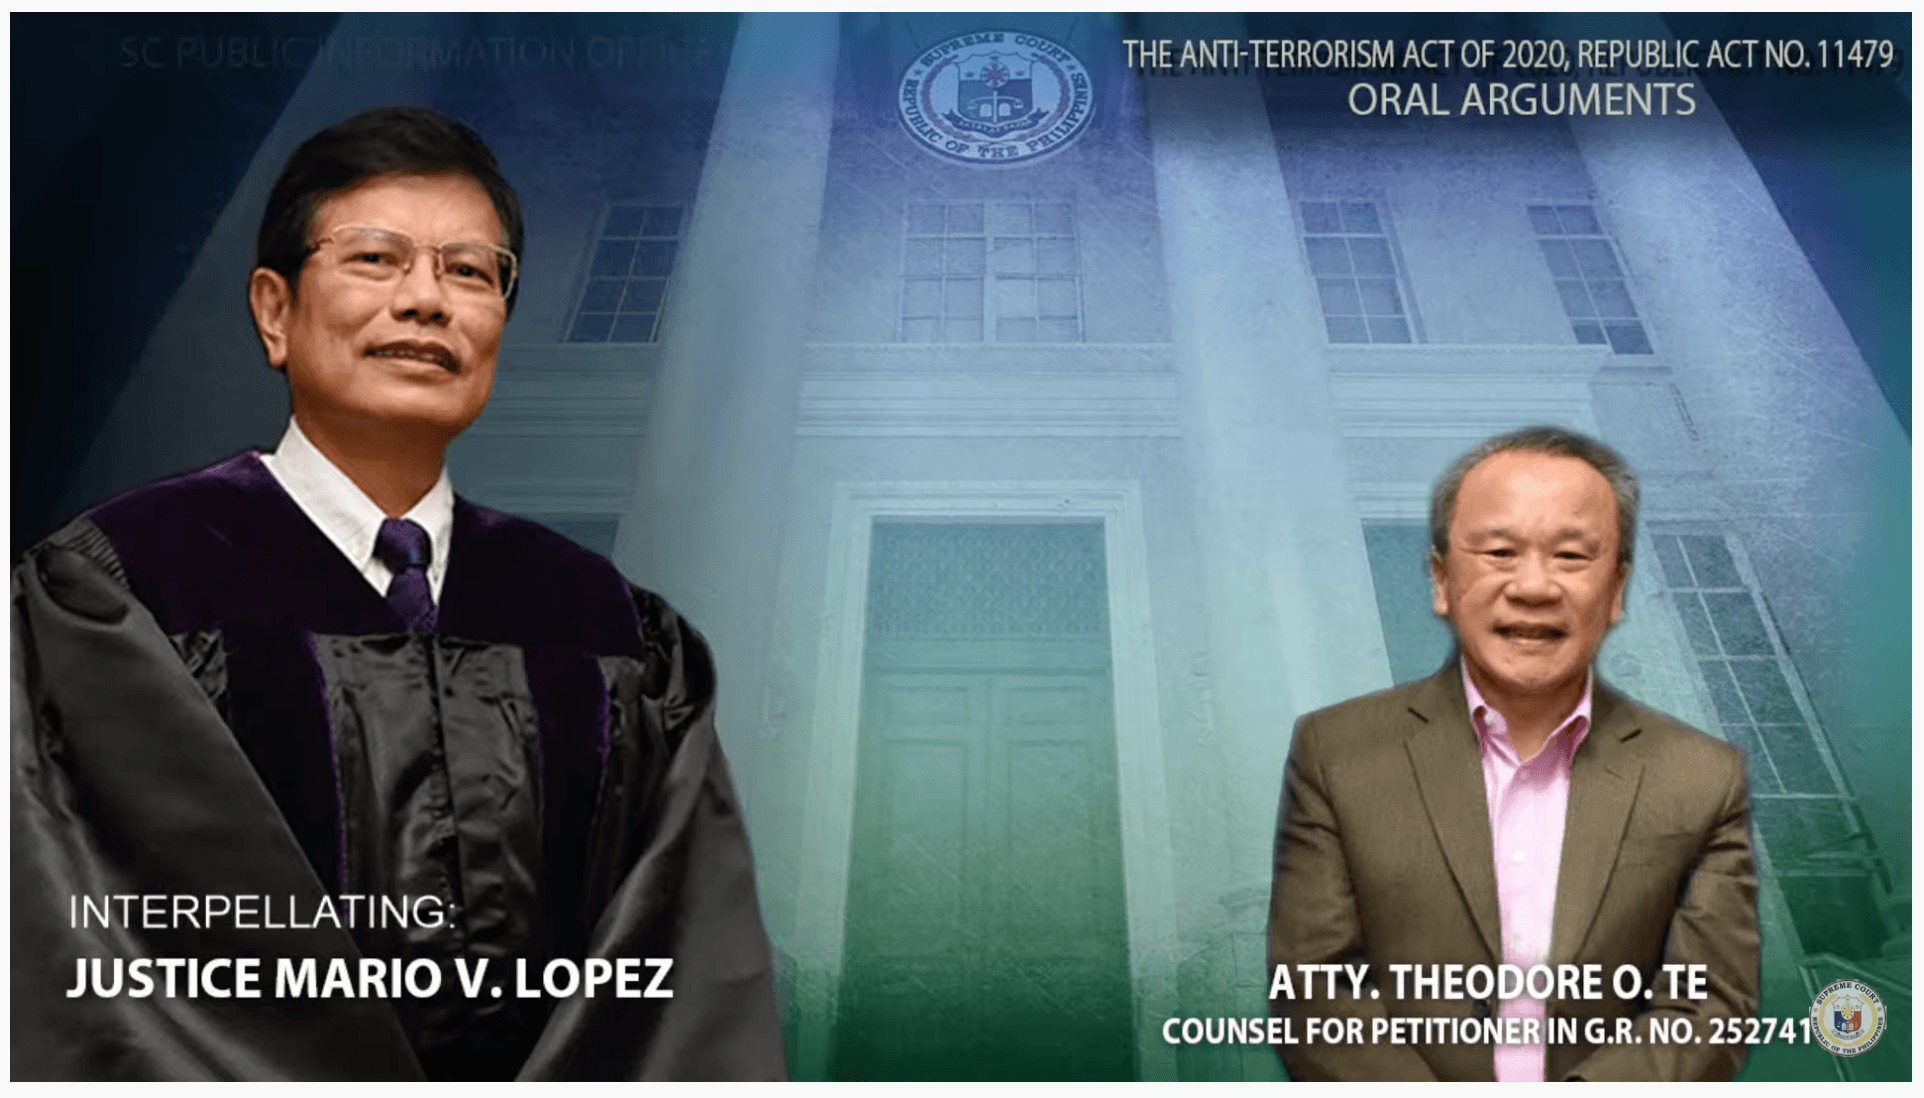 Anti-terror law: Lopez grills on criminal law, ends with deference to Congress